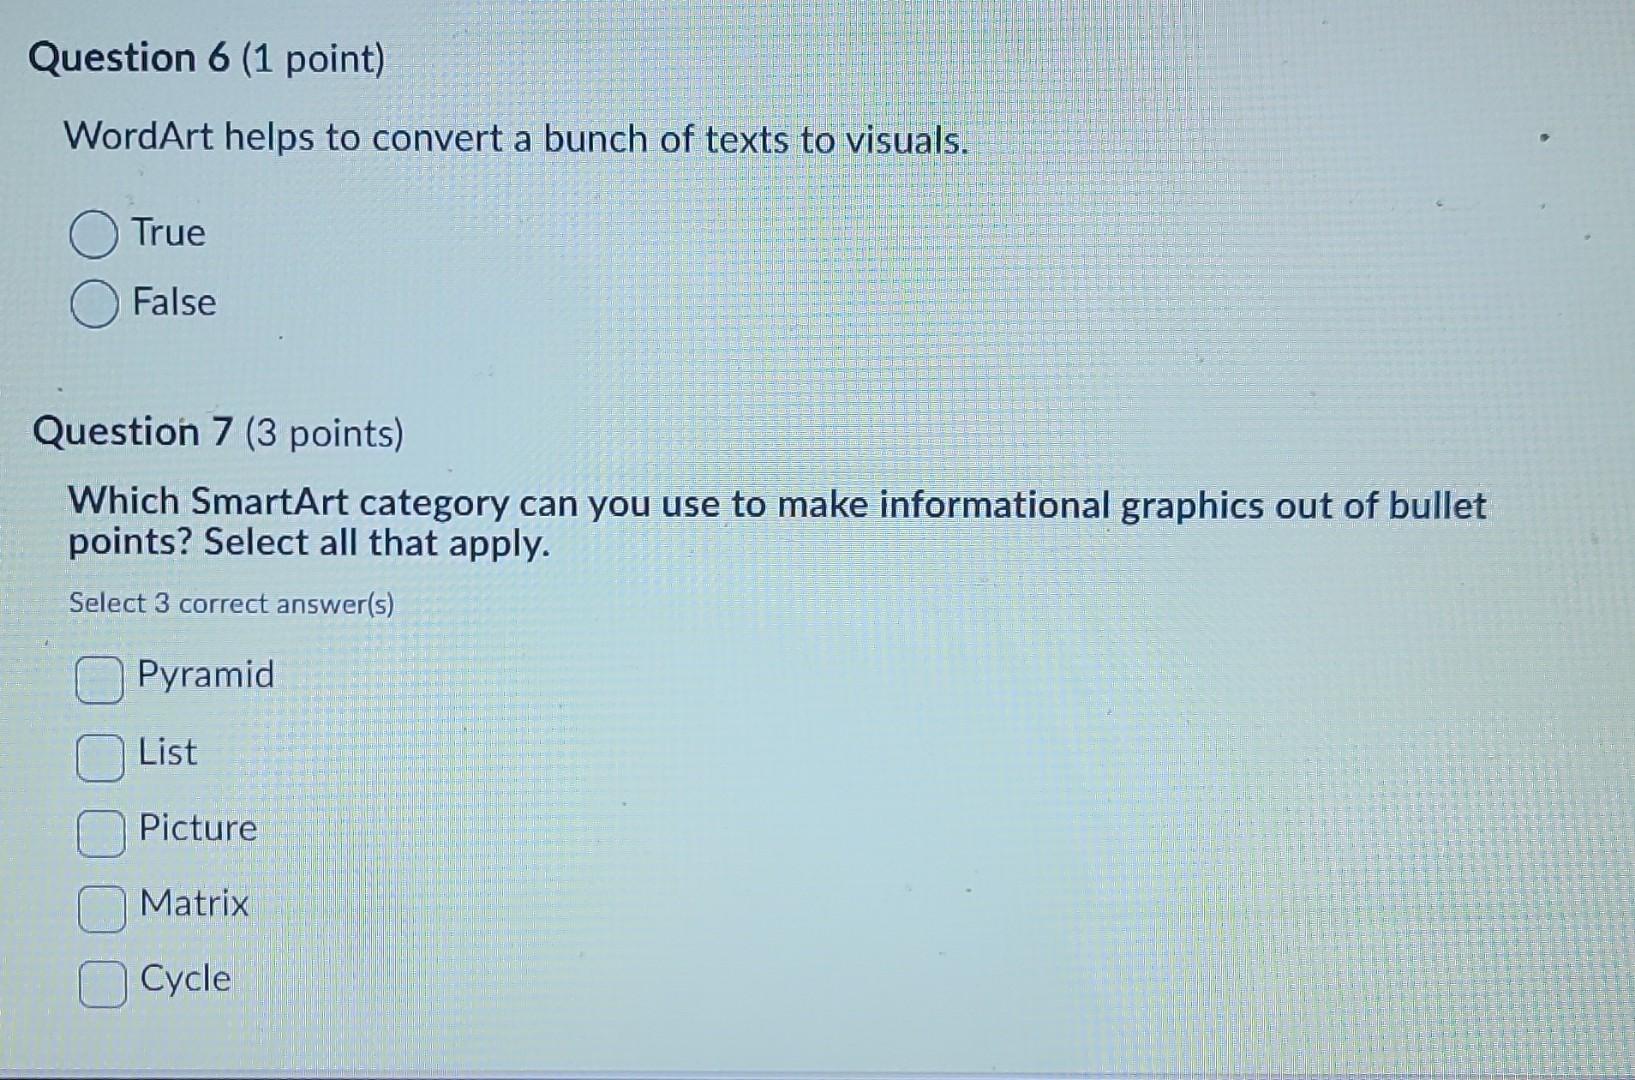 Creating Informational Graphics Out of Bullet Points: SmartArt Categories